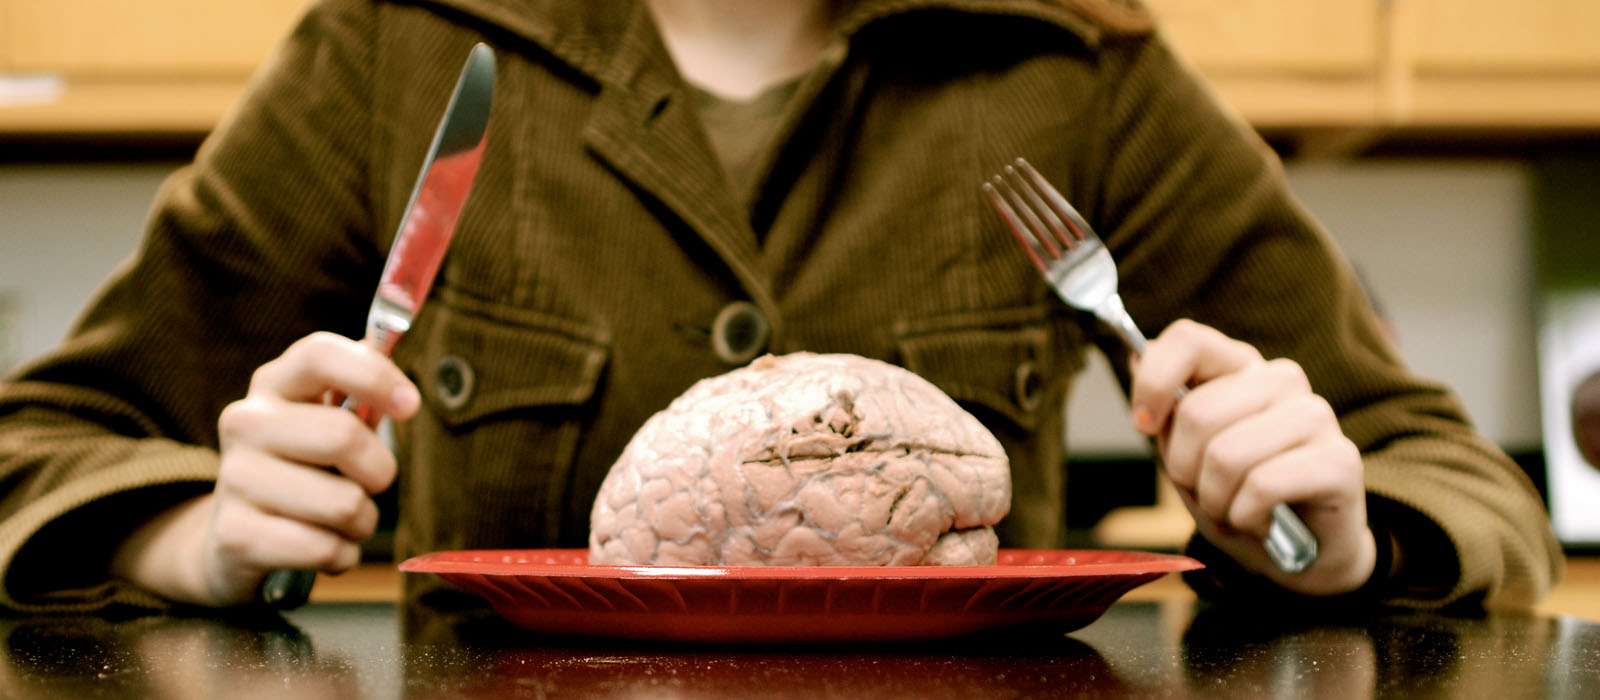 Eat Brains Like a Zombie: Why We Should Learn From Others